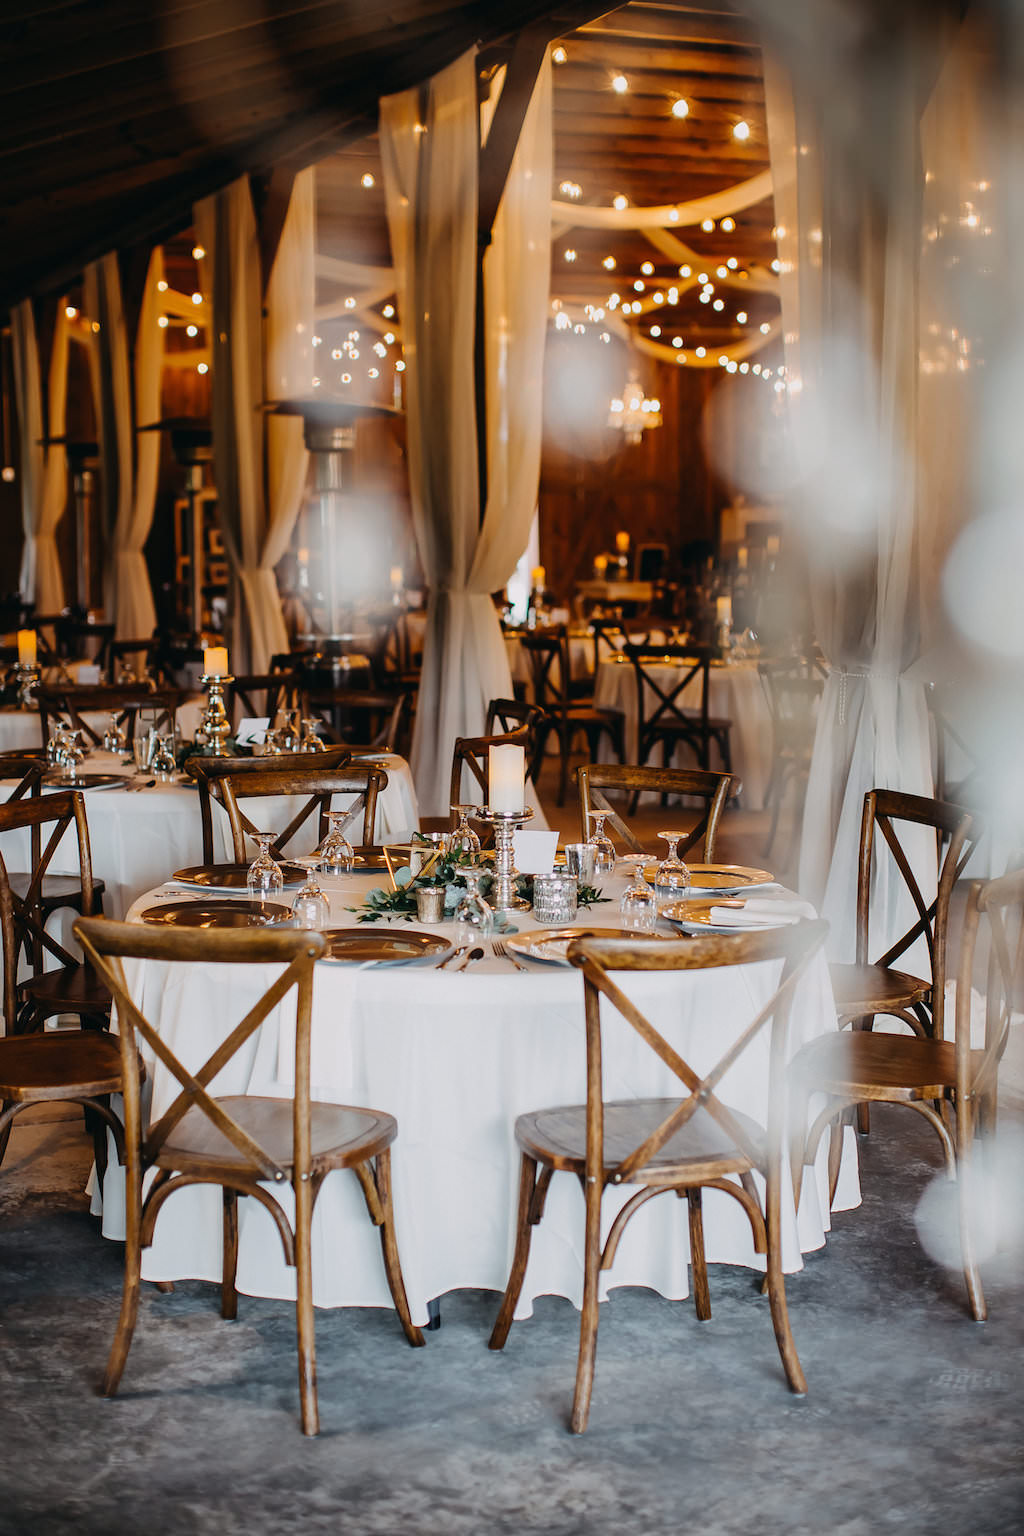 Indoor Rustic Barn Wedding Reception Decor with Round Table with White Tablecloth, with Pillar Candles with Silver Candlestick Holders Centerpieces, Greenery, Wooden Cross Back Chairs and String Lights and Drapery | Tampa Bay Wedding Photographer Rad Red Creative | Lithia Wedding Venue Southern Grace